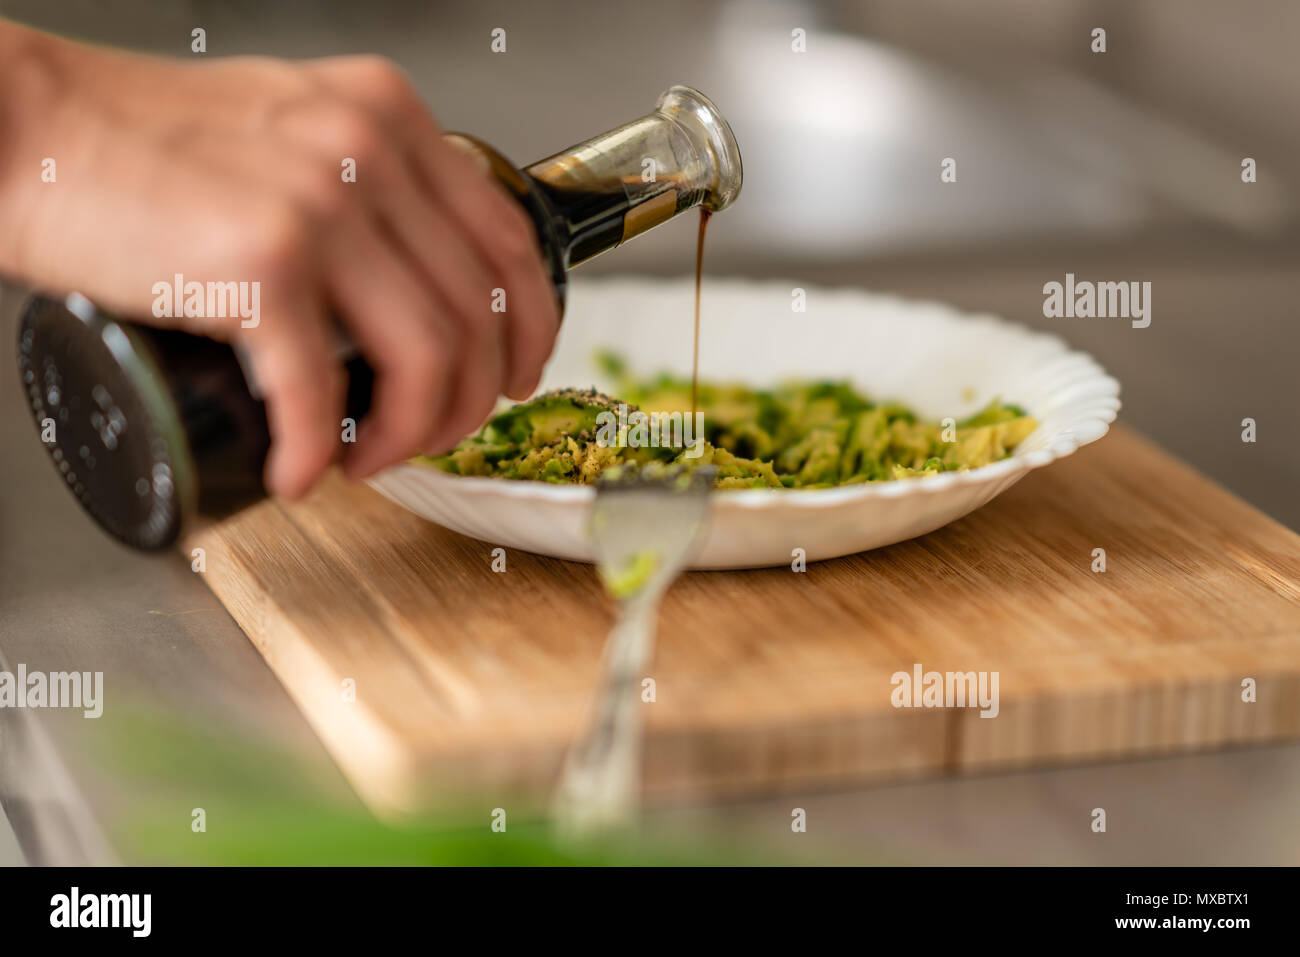 A woman is spicing up the Guacamole with Balsamico. Stock Photo